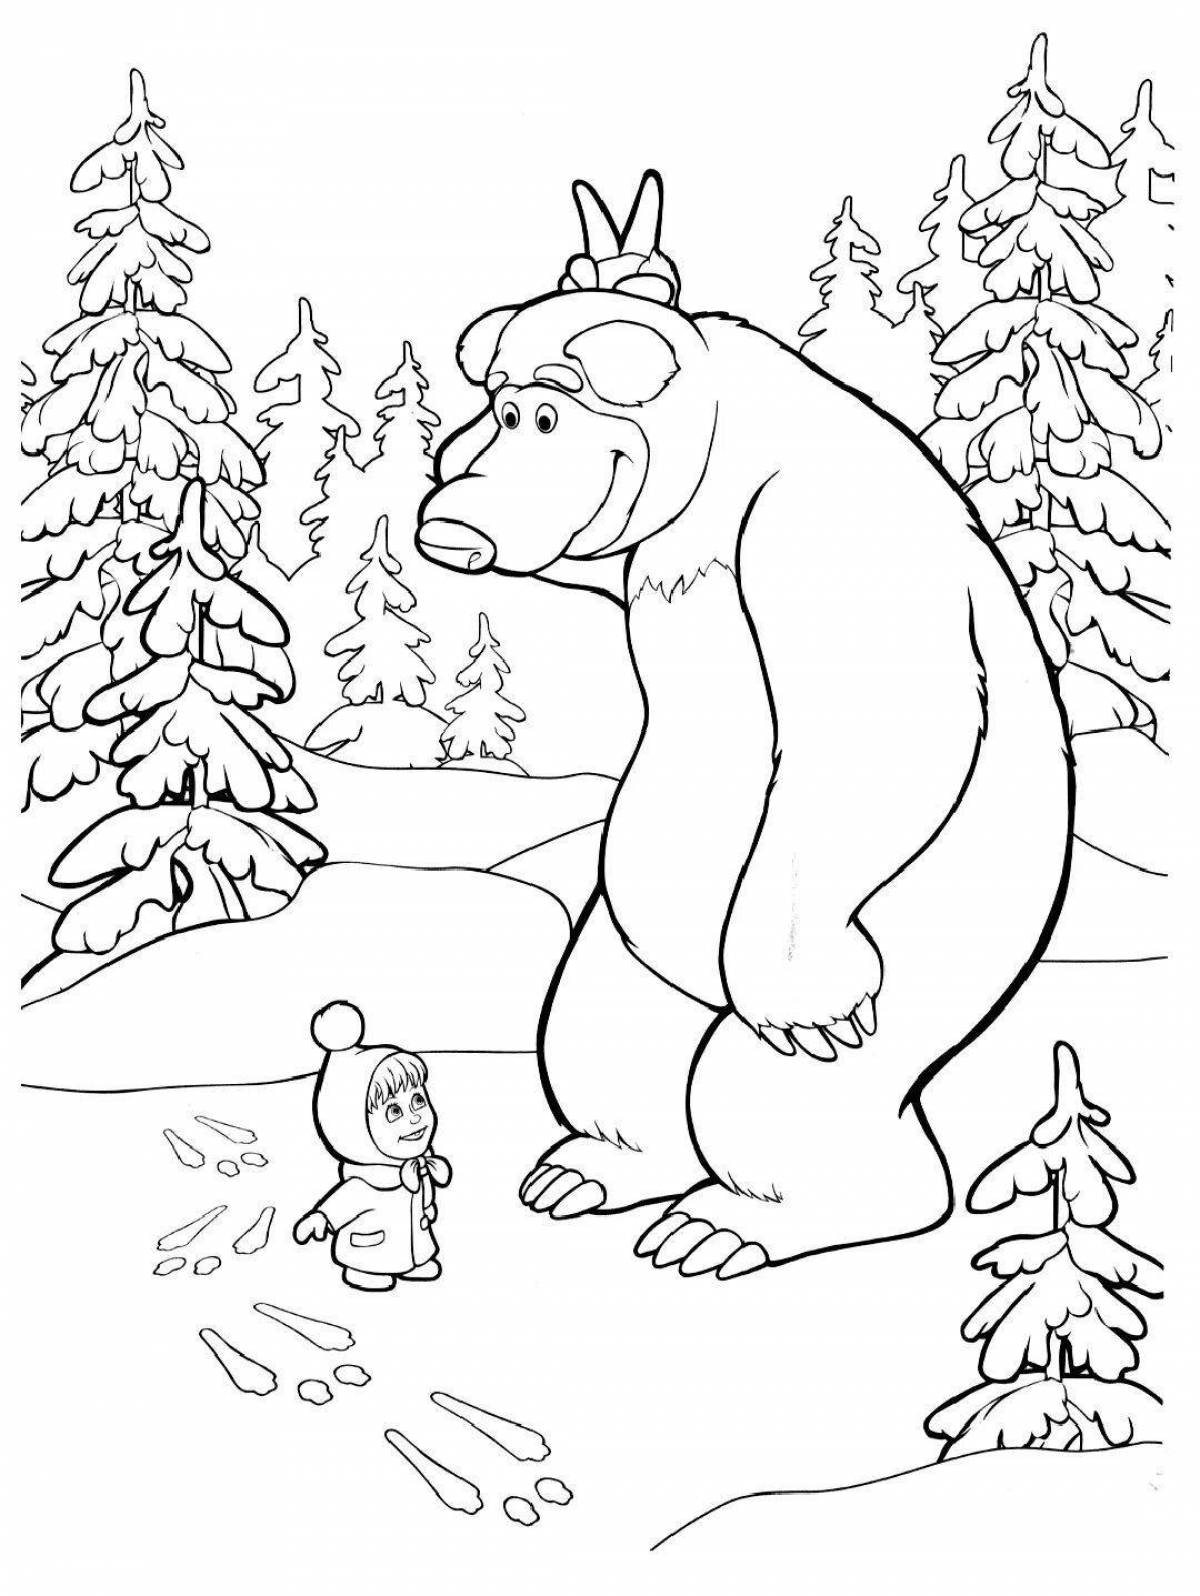 Sparkling bear coloring book in winter